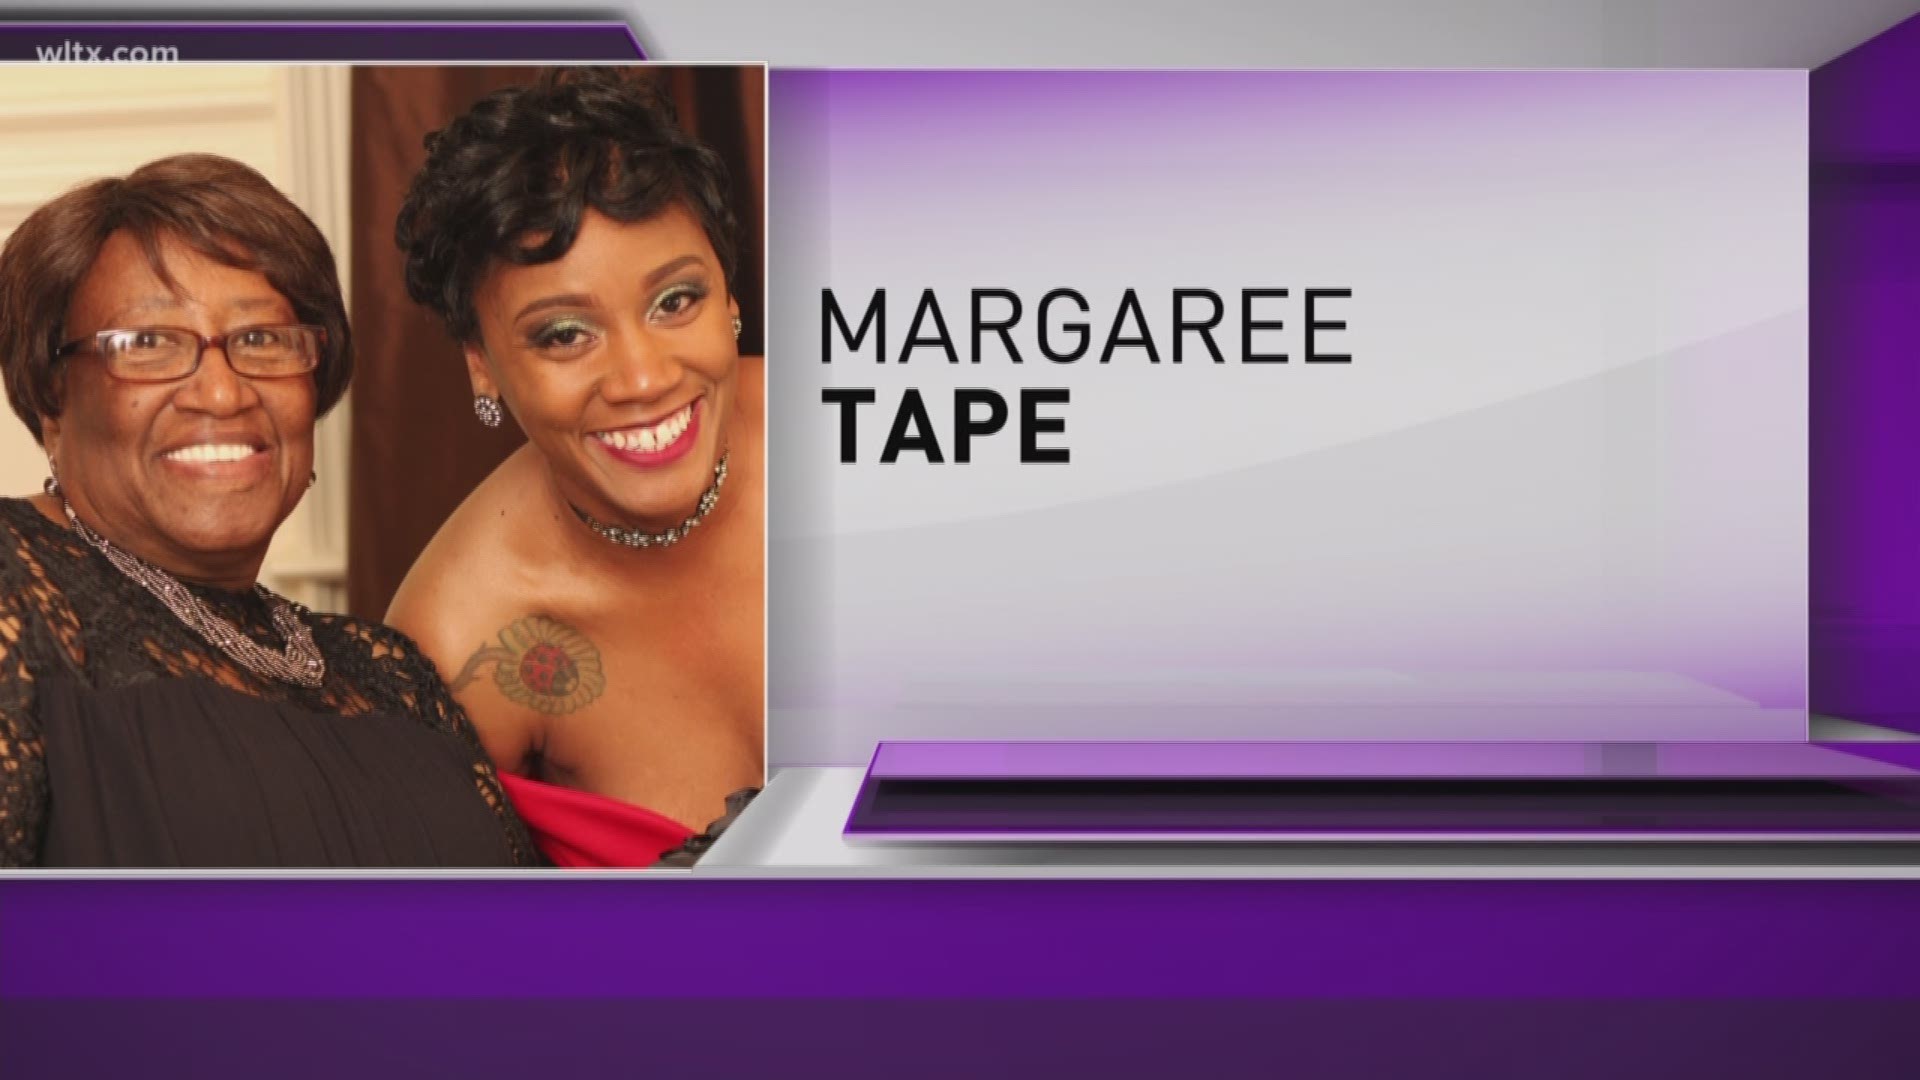 Congratulations to our Mom of the Day, Margaree Tape! Margaree was nominated by her daughter Marquita.